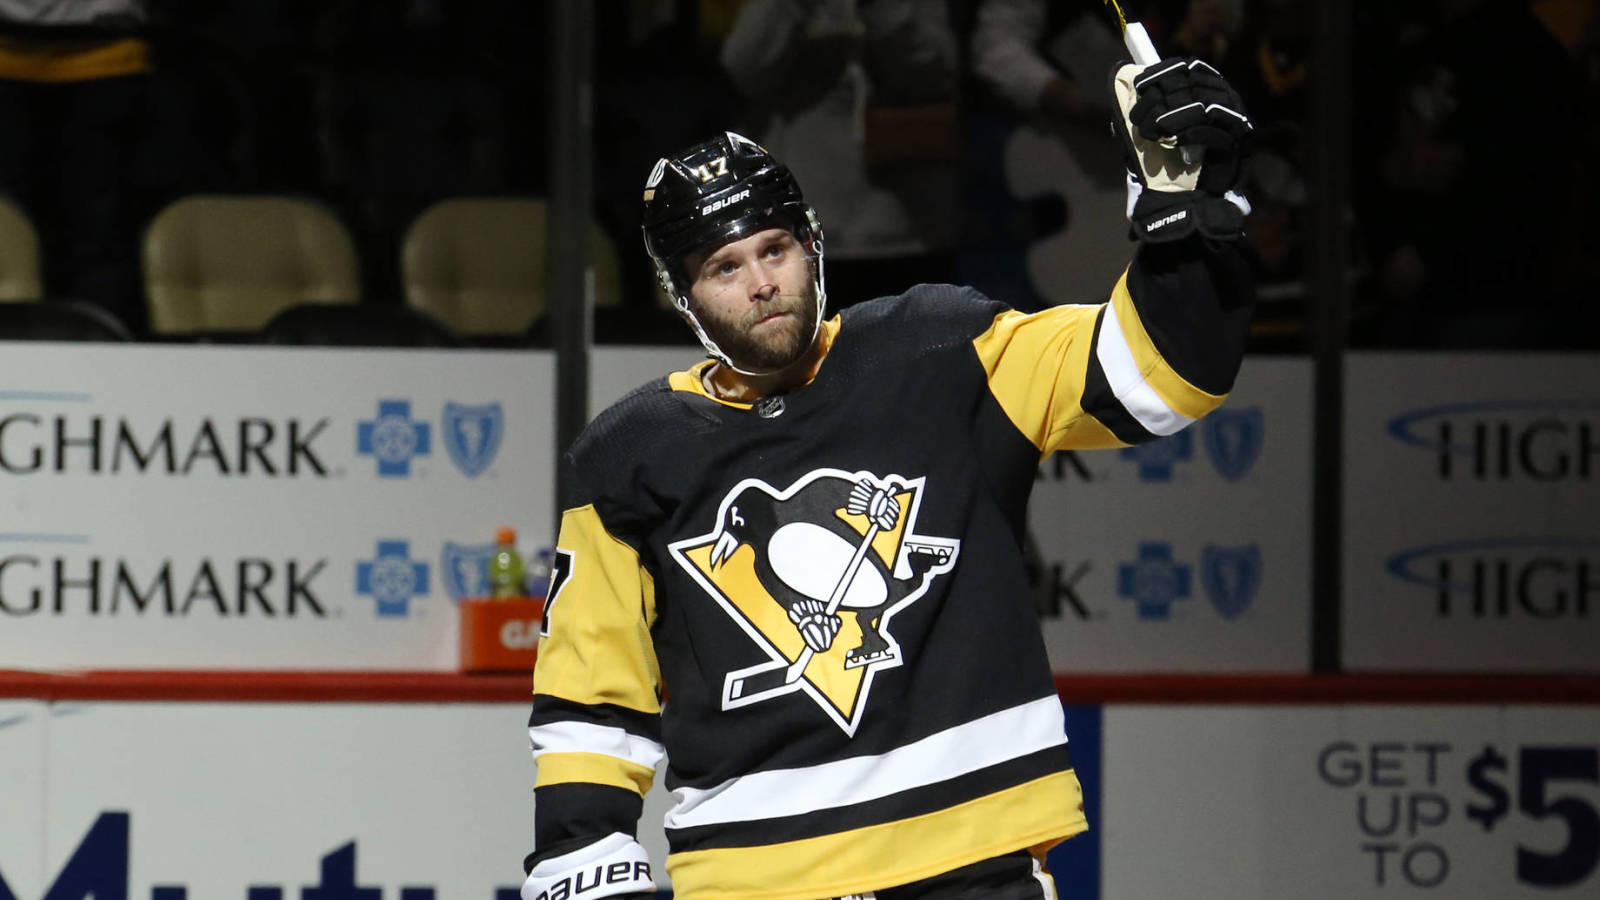 no rust for bryan rust penguins forward starring since return from injury